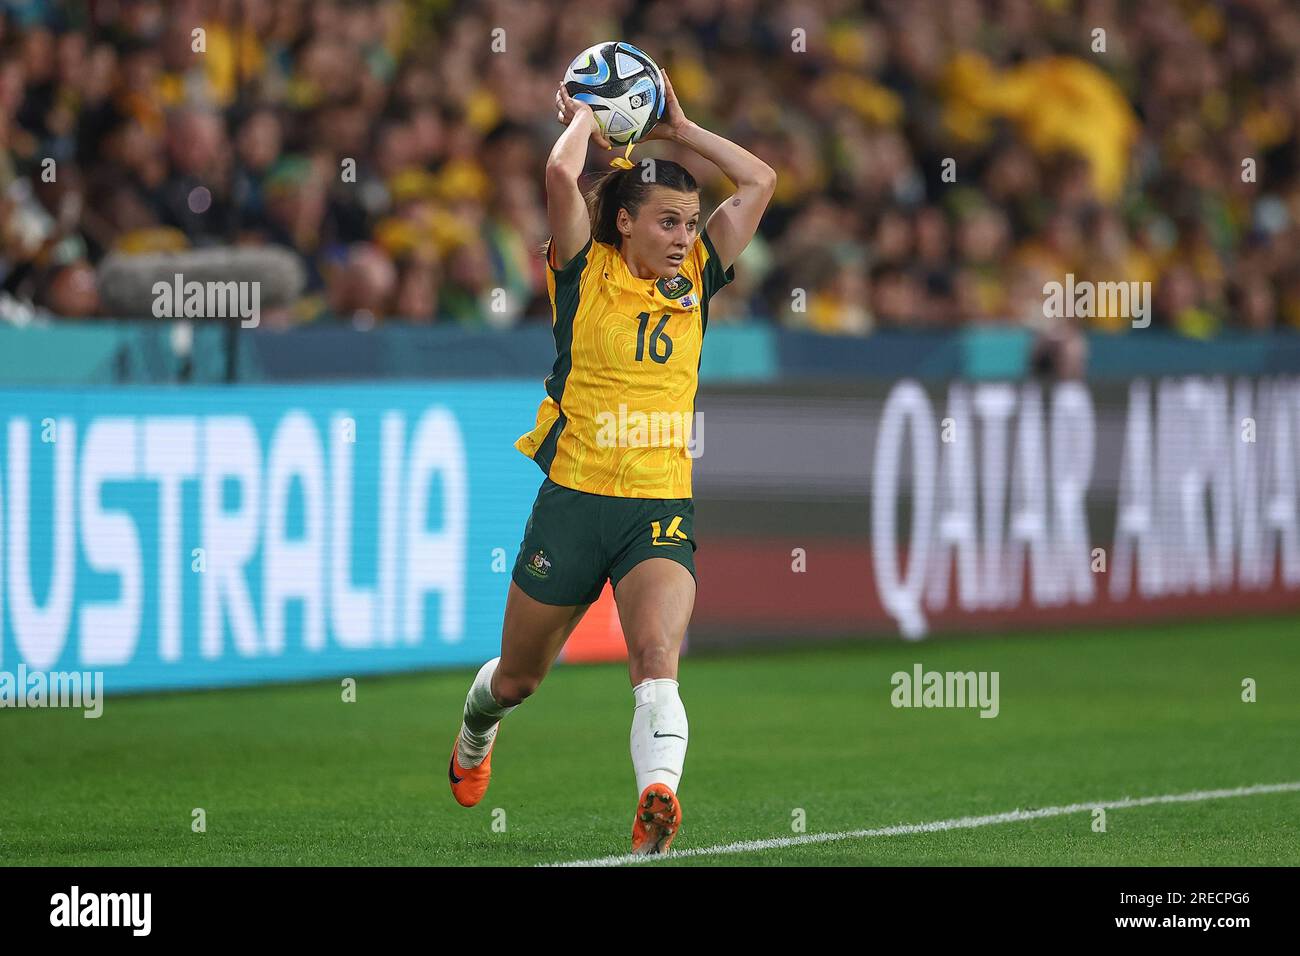 FIFA Women's World Cup Brisbane: What to Know